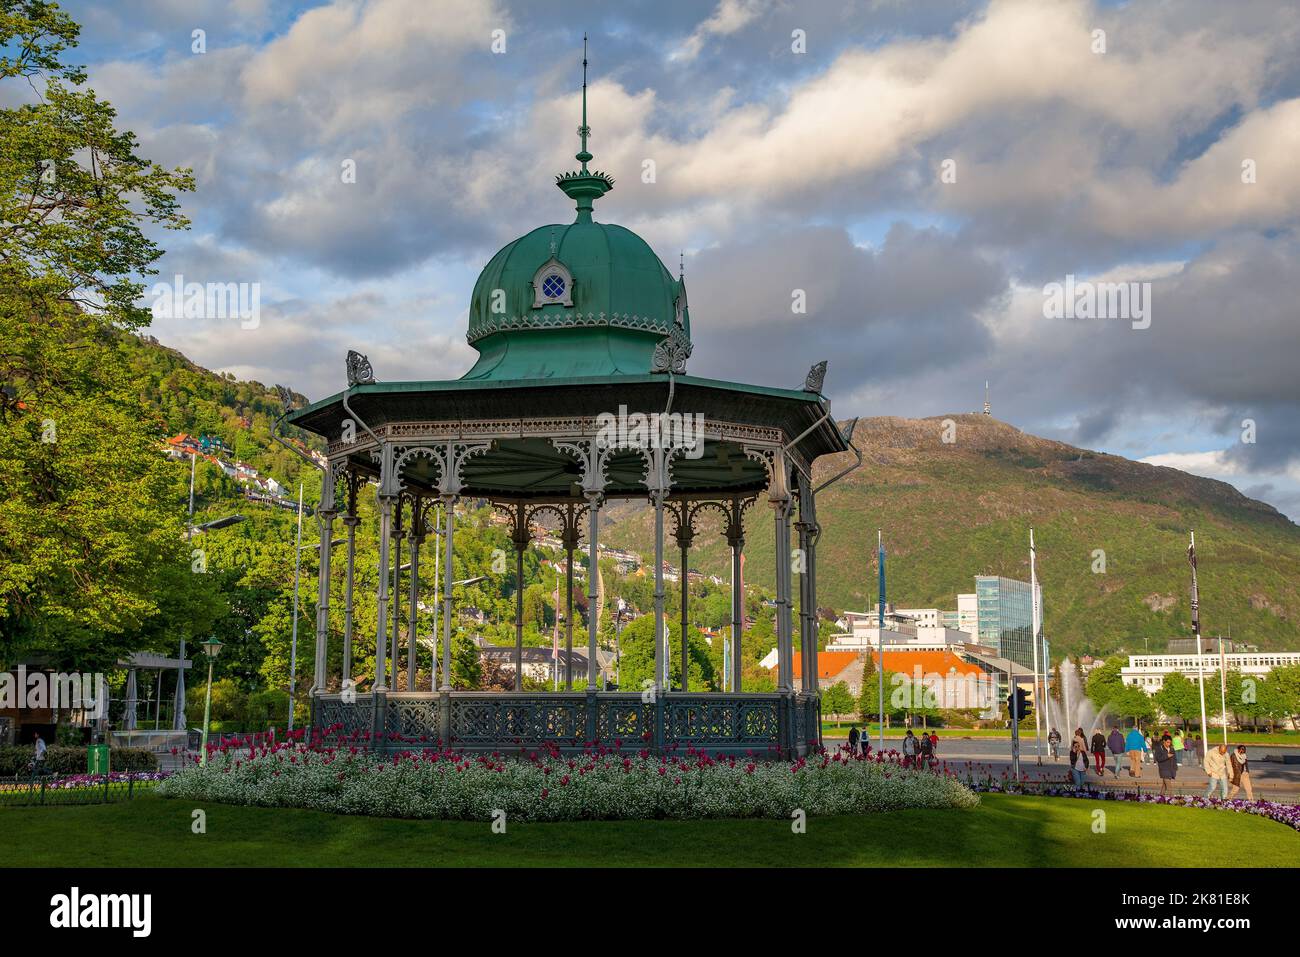 The Byparken gazebo at the park in Bergen, Norway Stock Photo